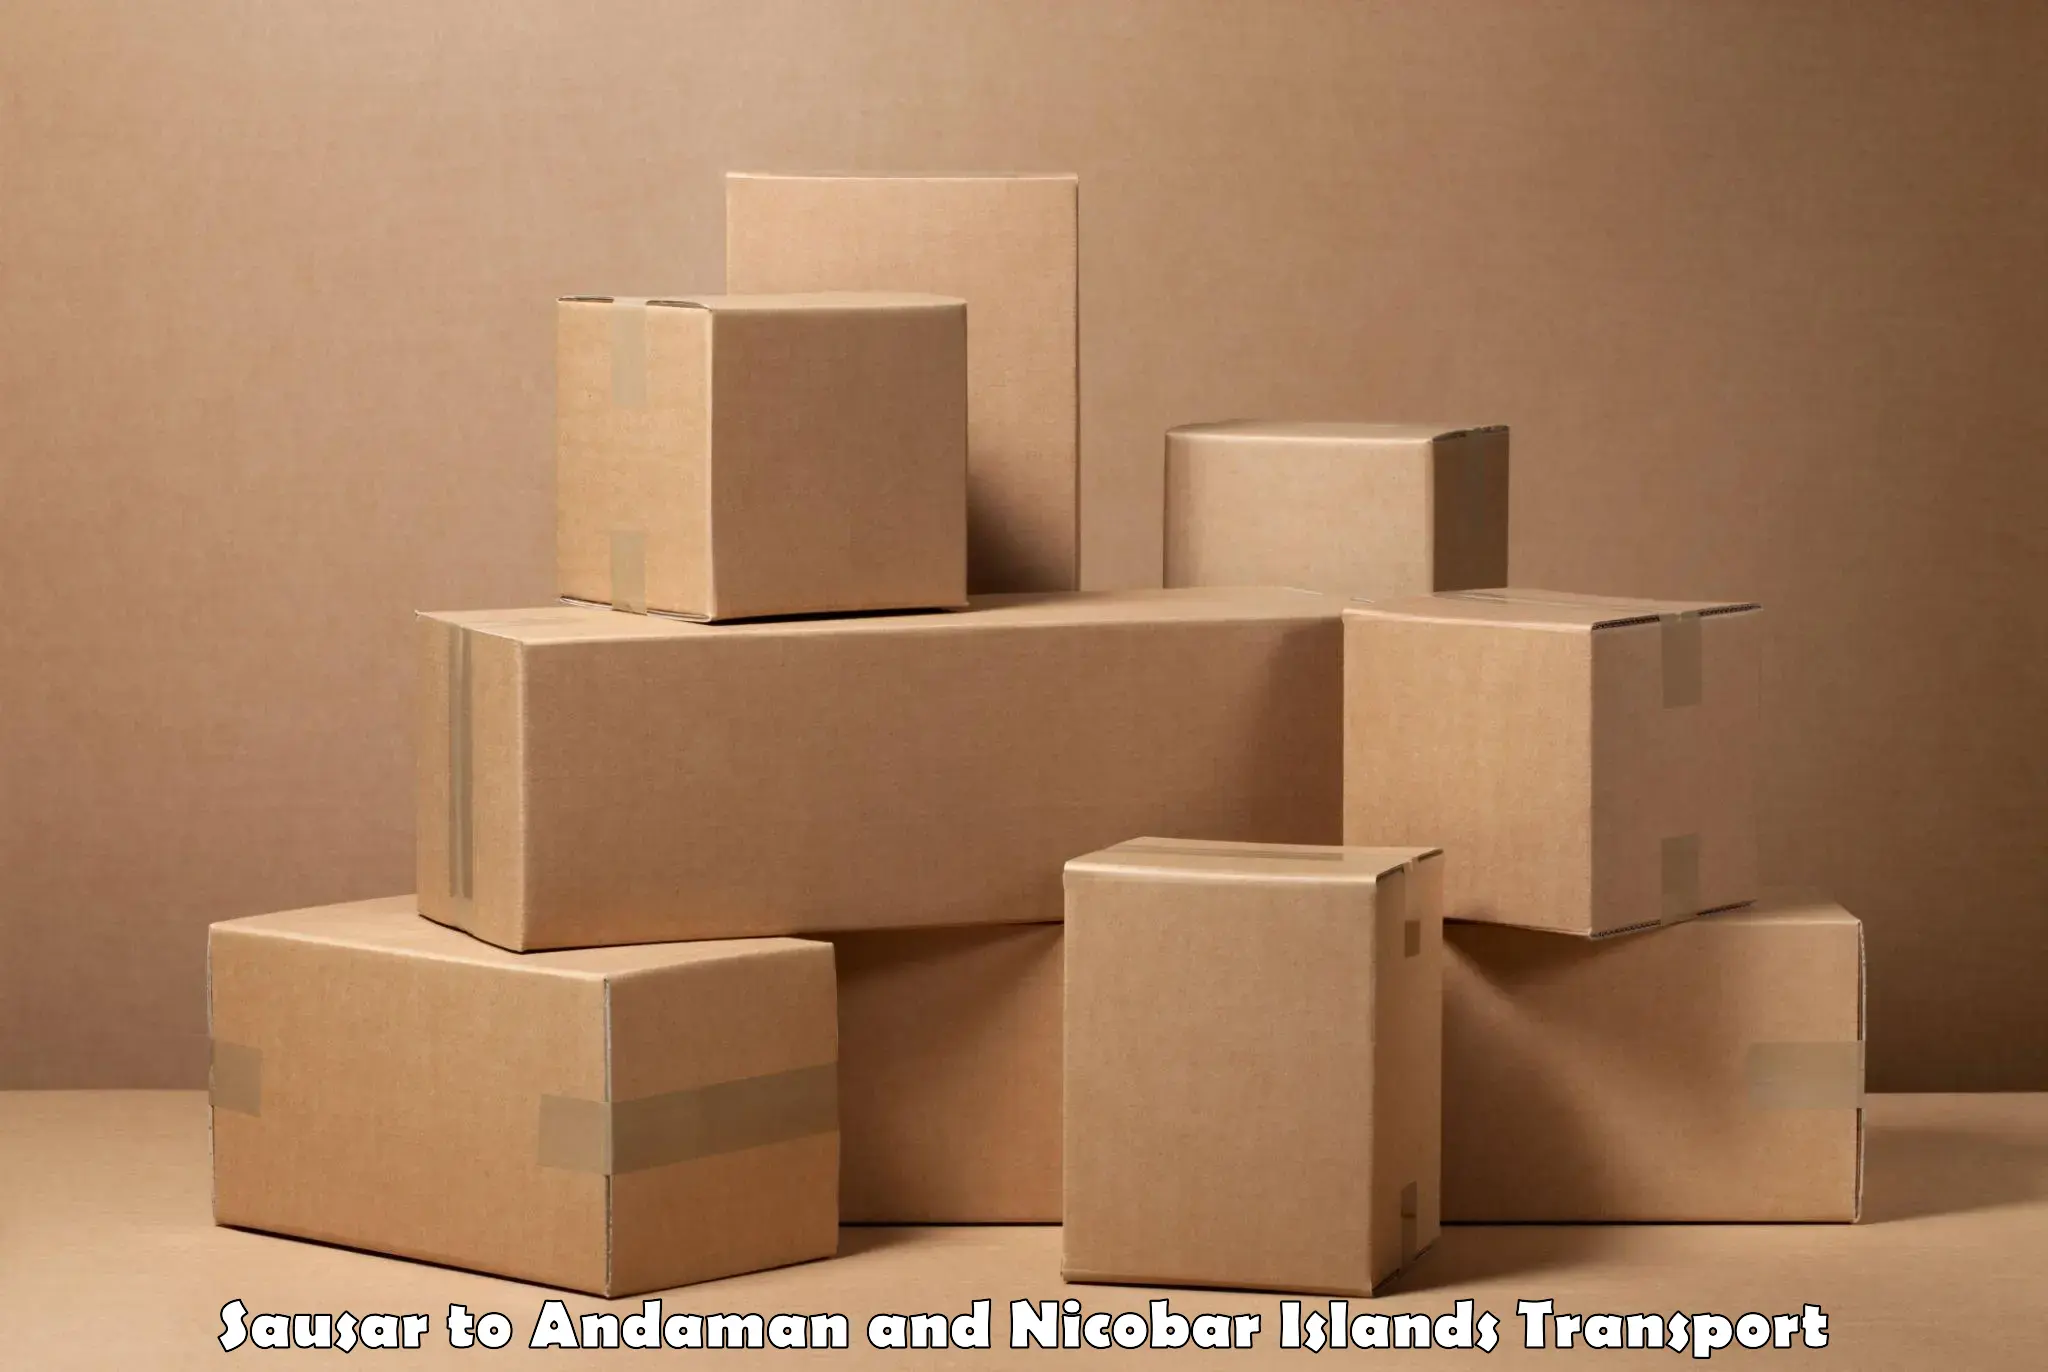 Truck transport companies in India in Sausar to Andaman and Nicobar Islands